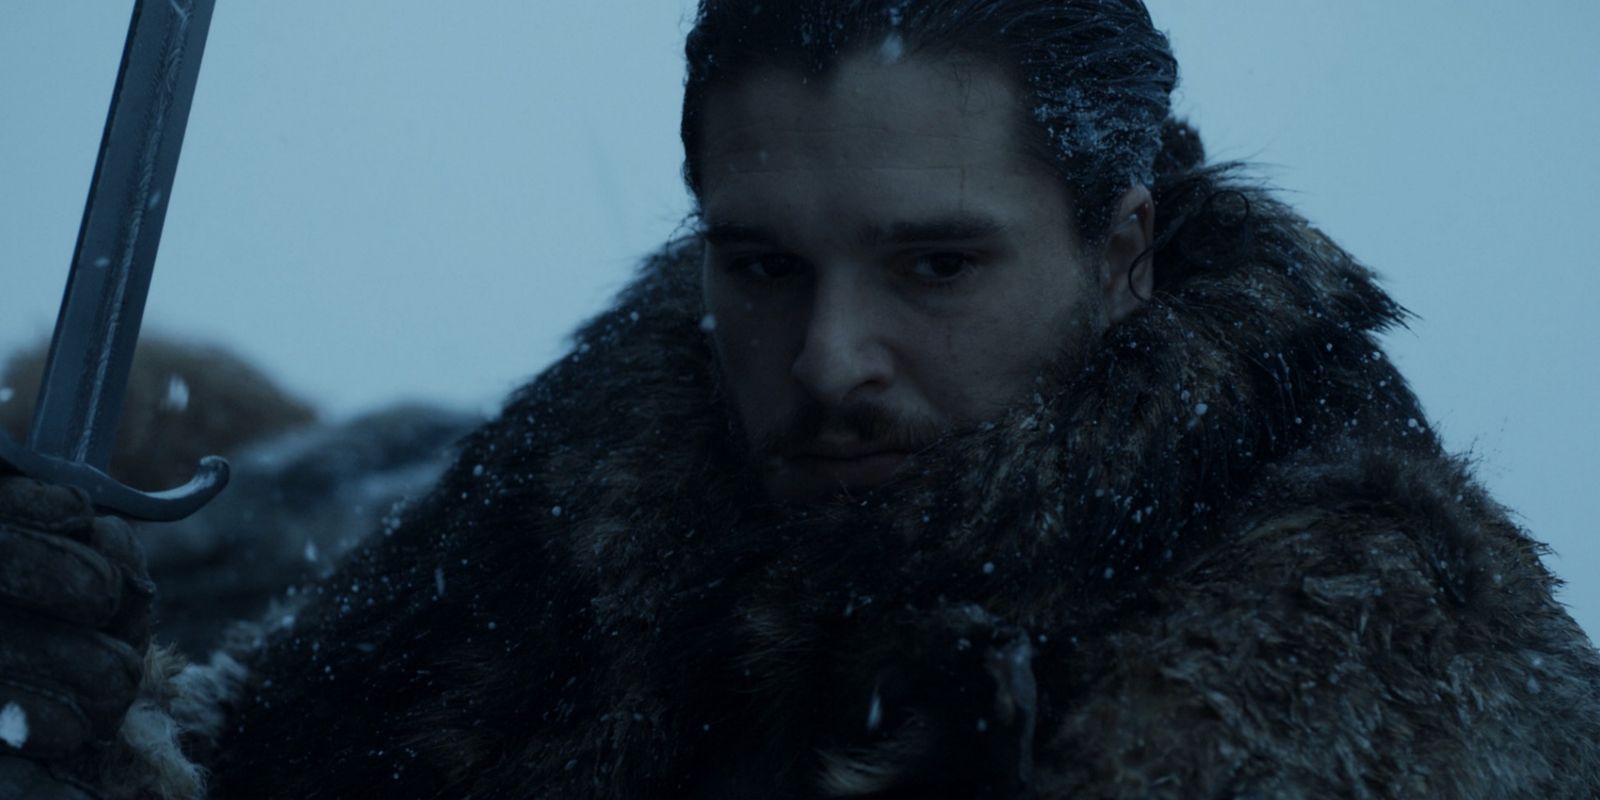 Game of Thrones Beyond the Wall Review & Discussion